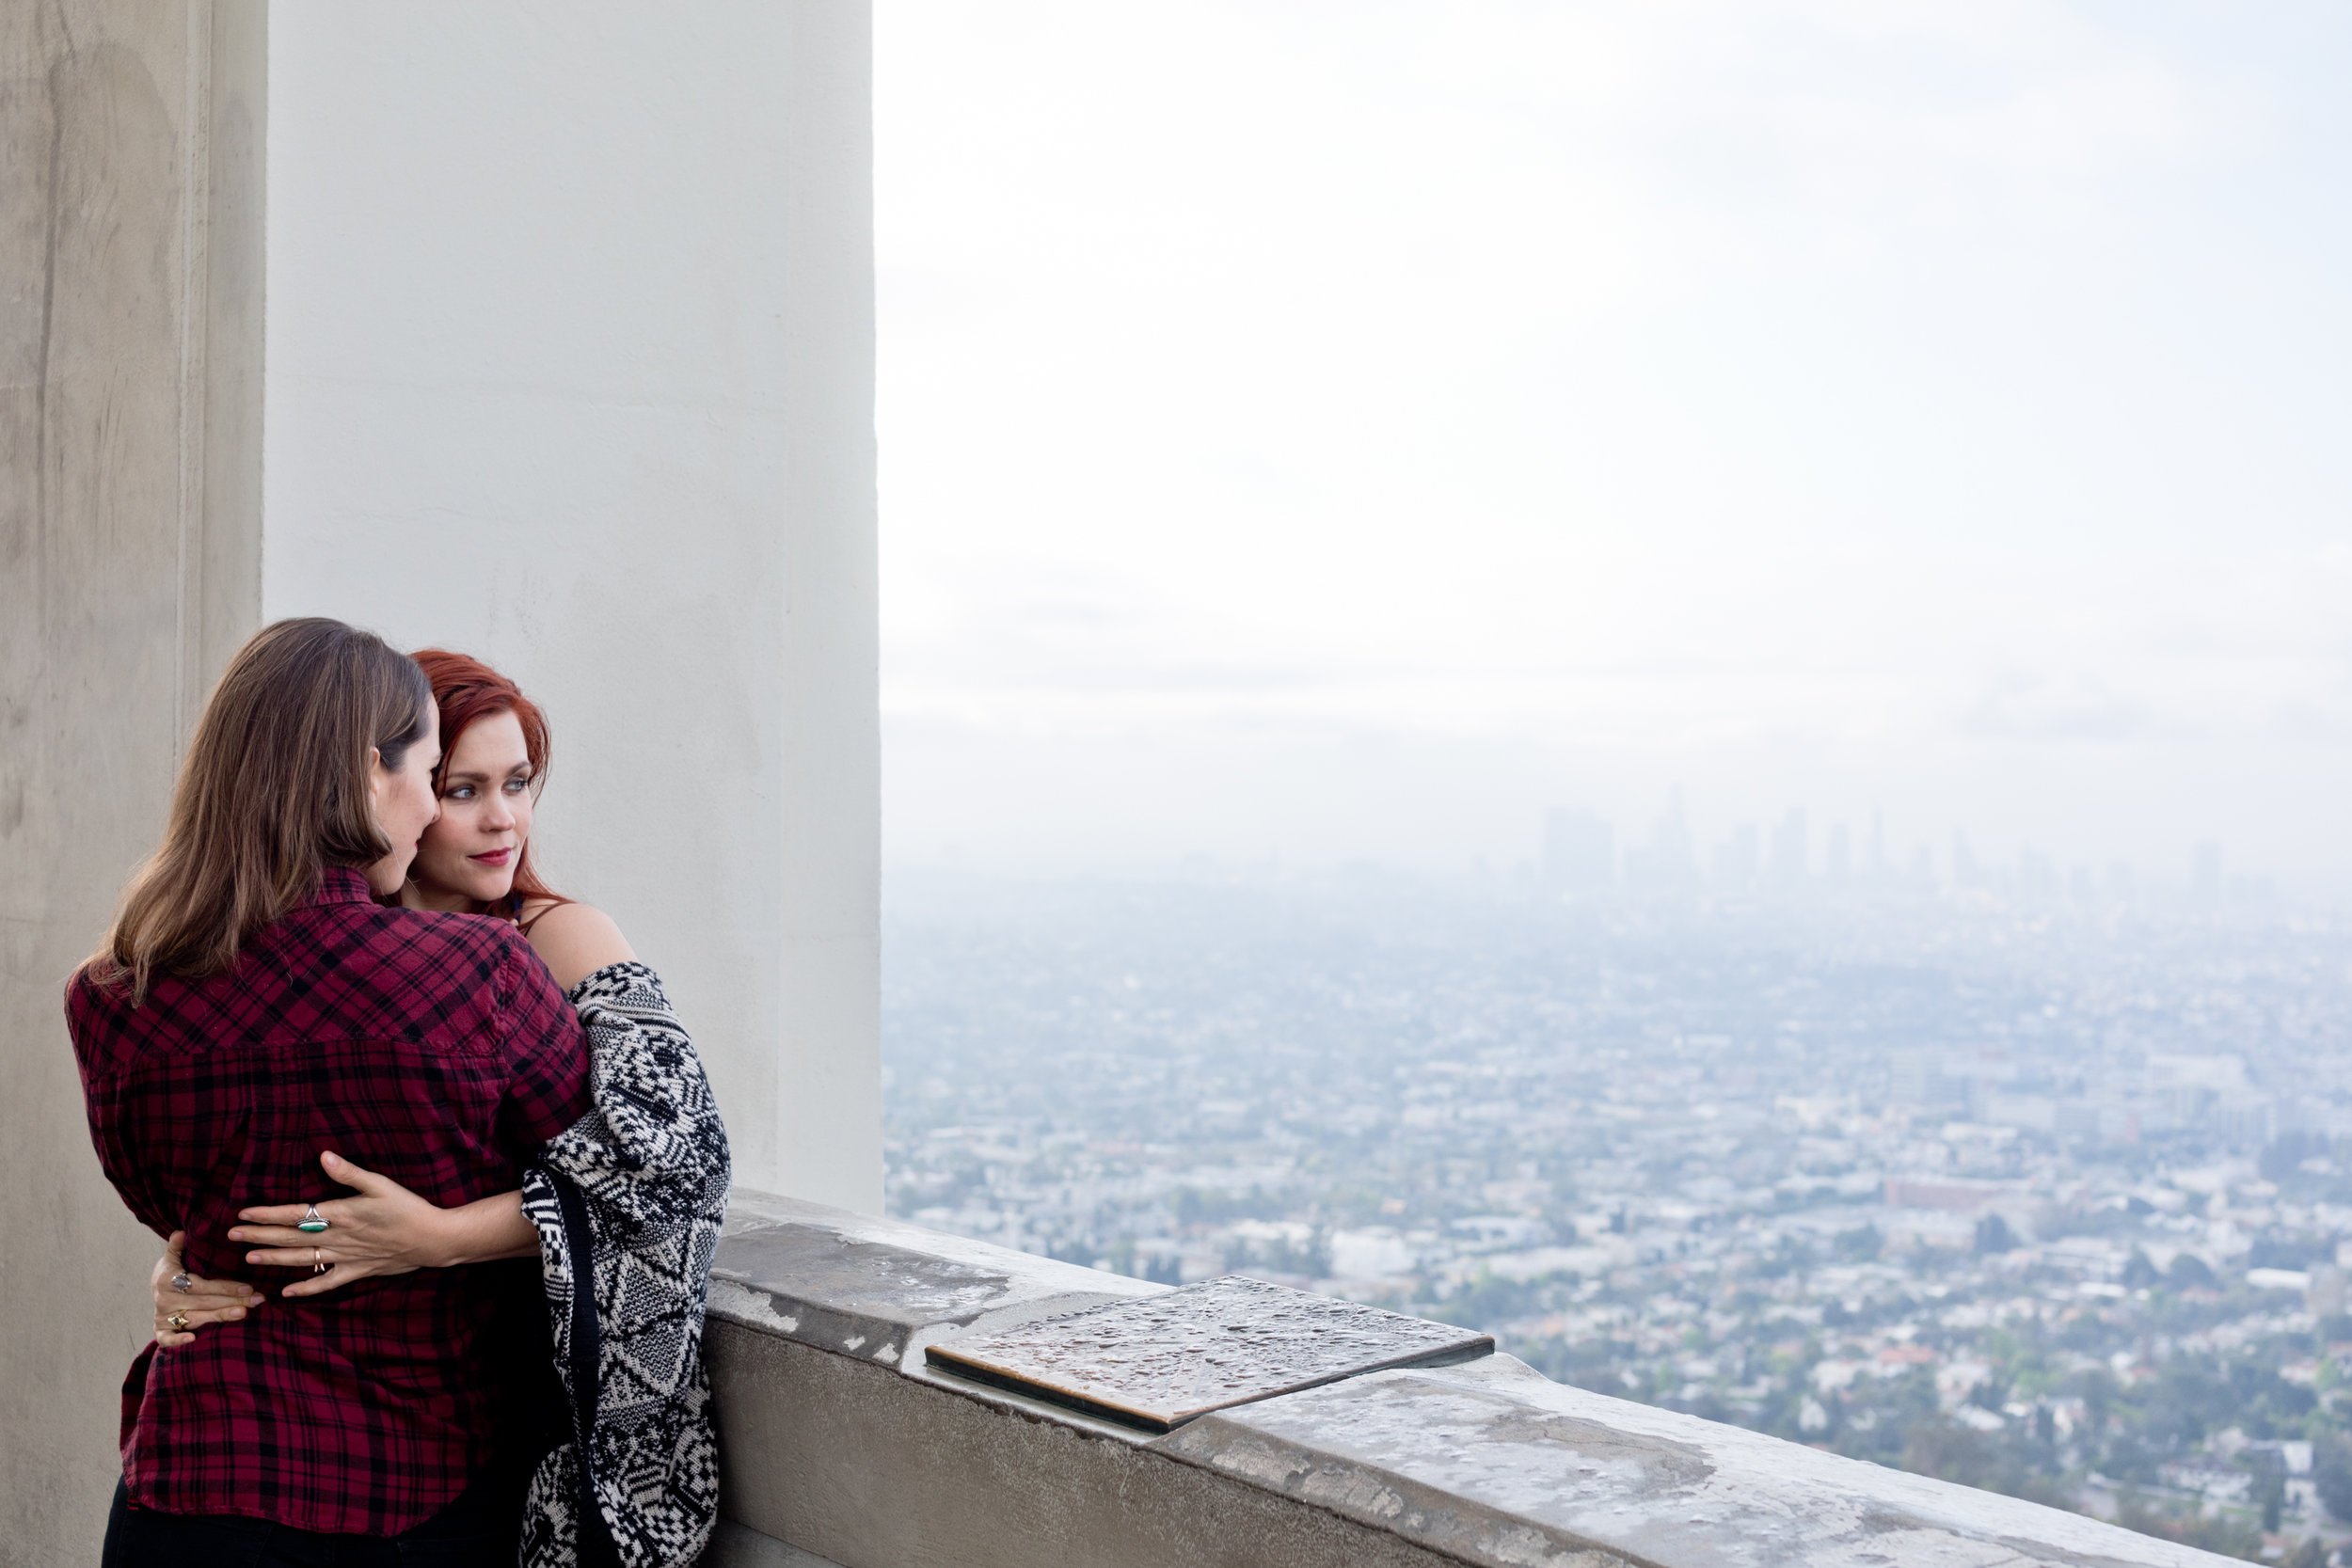 Courtney &amp; Tierney embracing at the griffith observatory with LA in the background